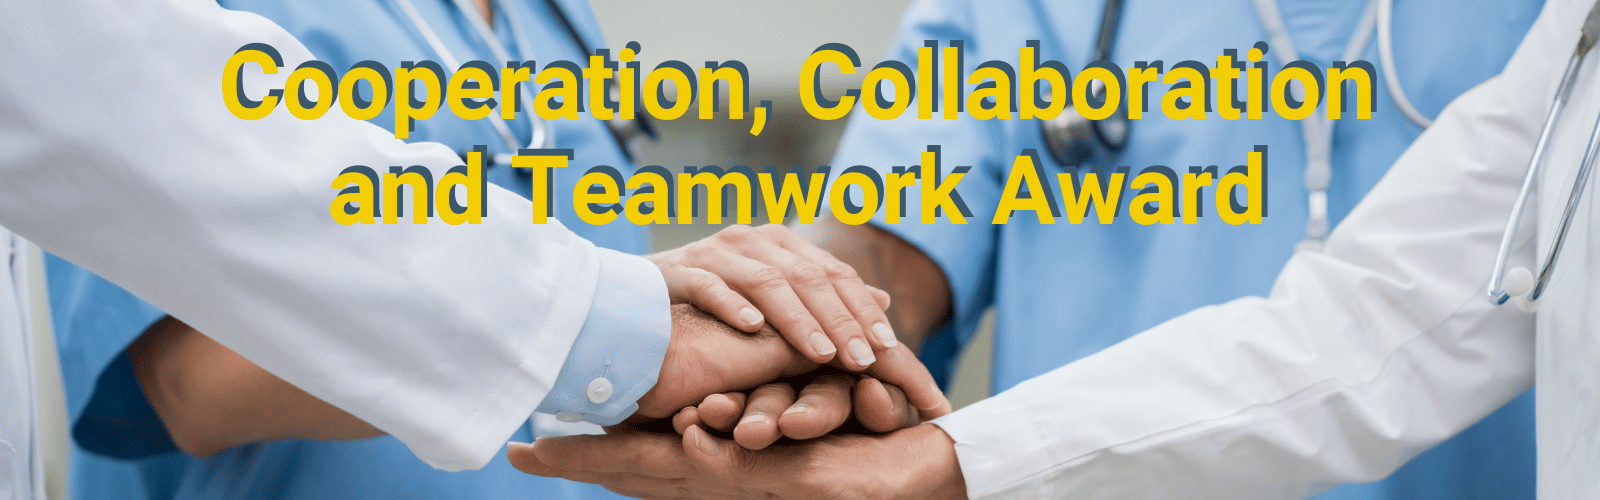 Cooperation, Collaboration and Teamwork Award